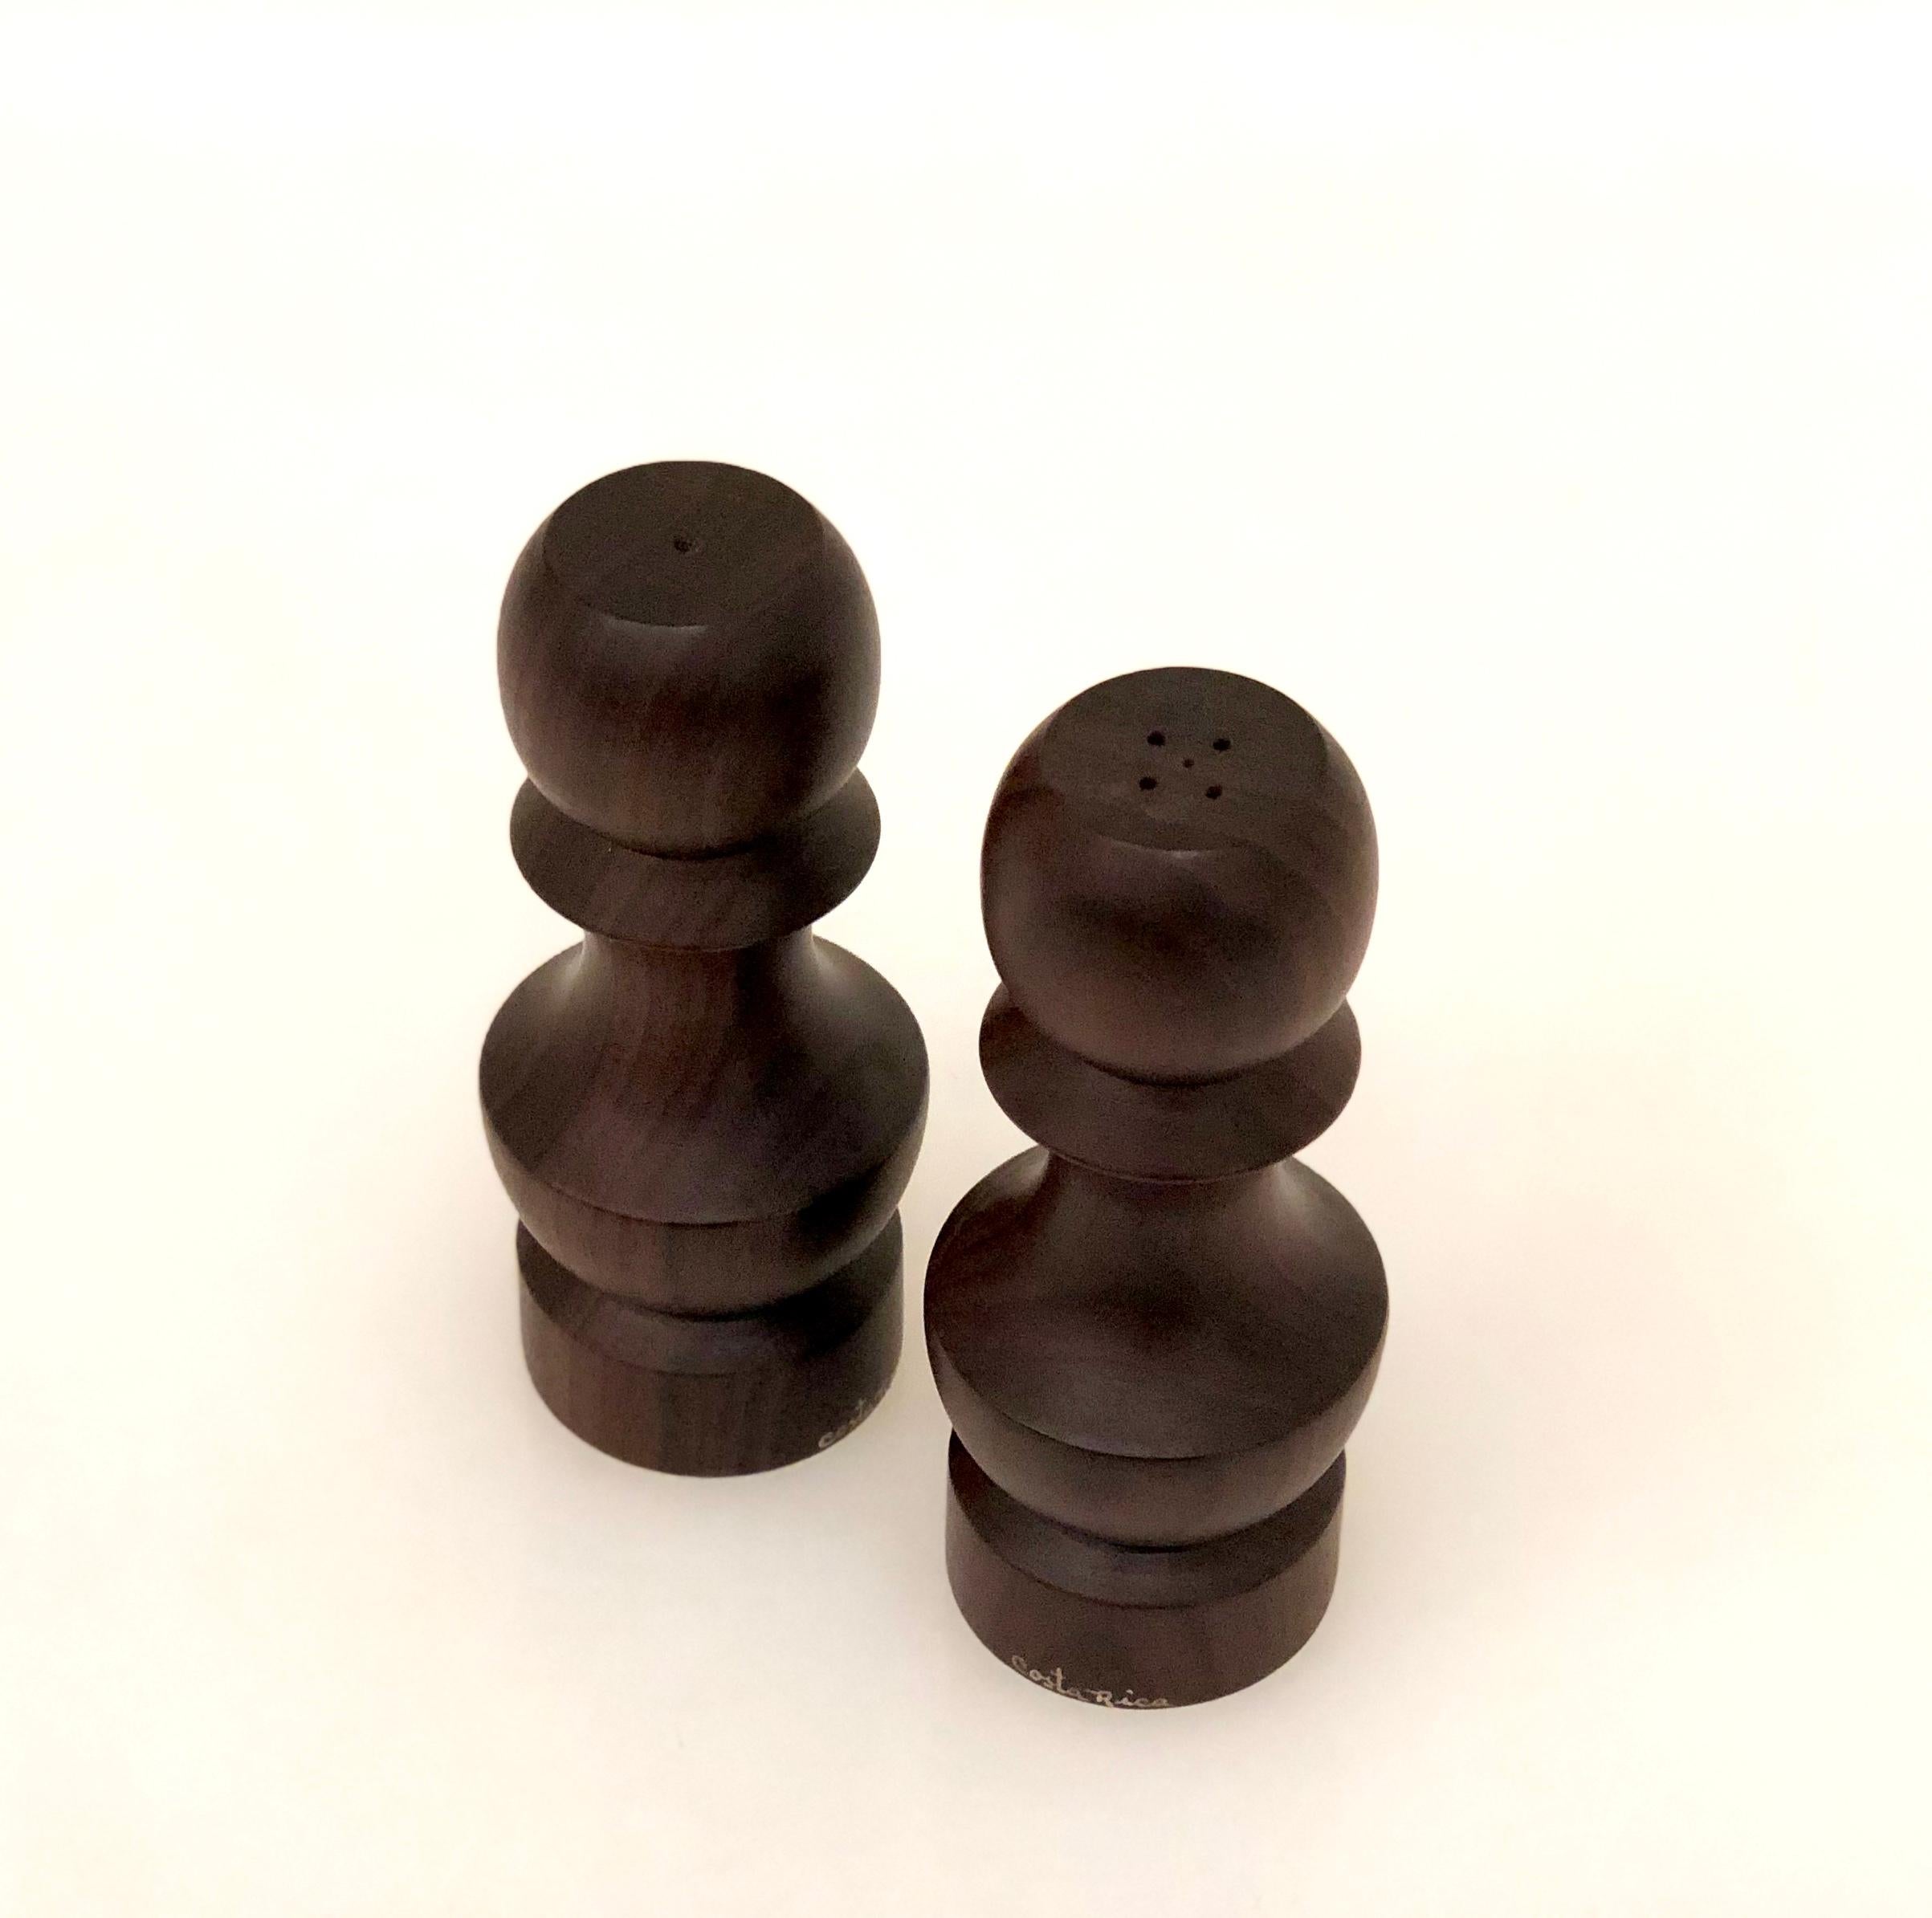 Scandinavian Modern Pair of Danish Modern Solid Rosewood Hand Turned Salt and Pepper Shakers For Sale